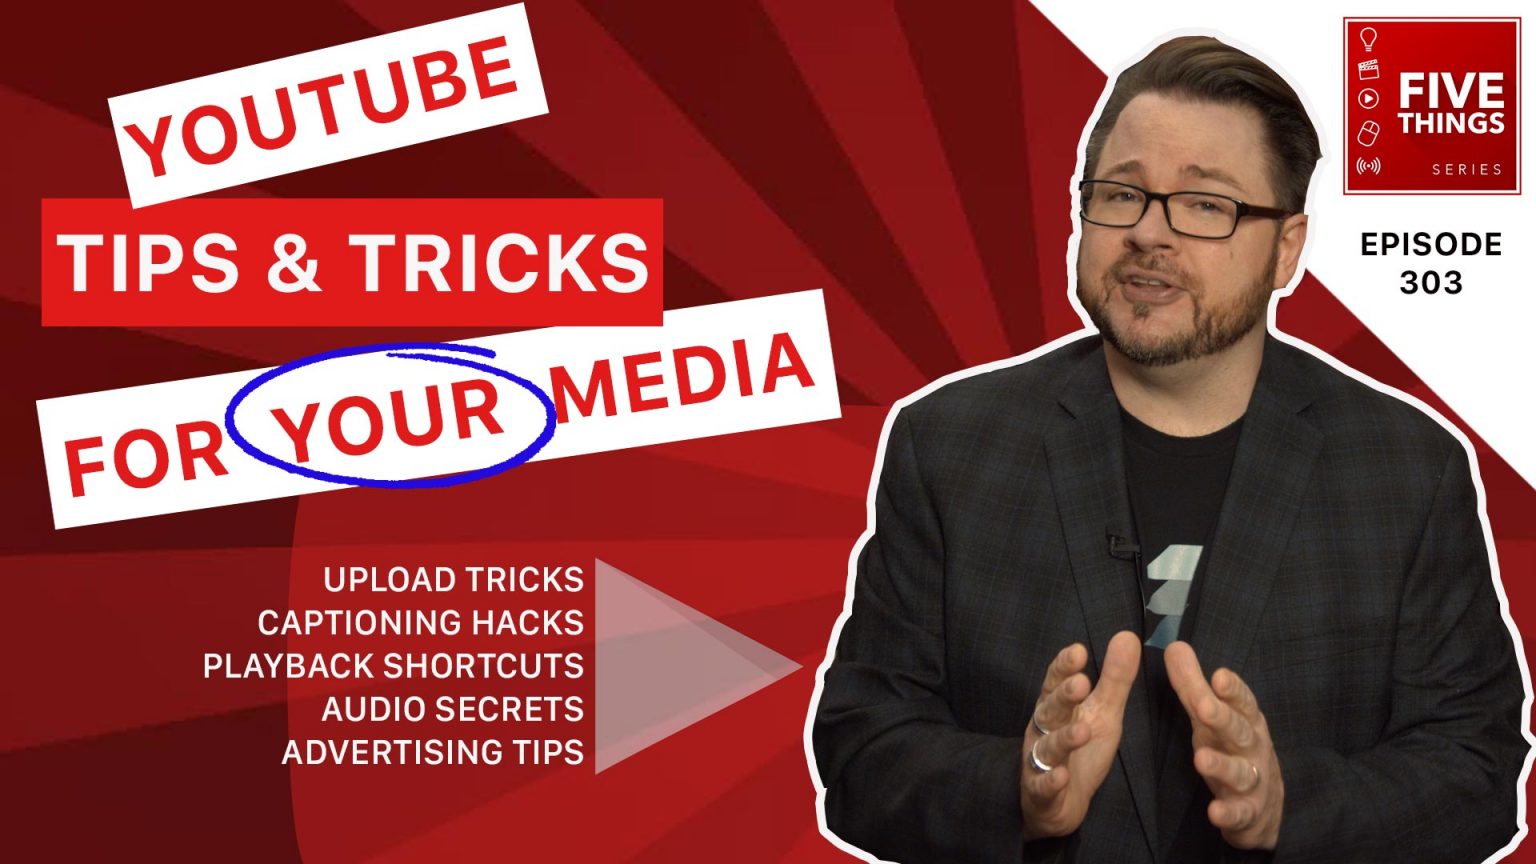 S03E03-YouTube-Tips-and-Tricks-for-YOUR-Media-Thumbnail